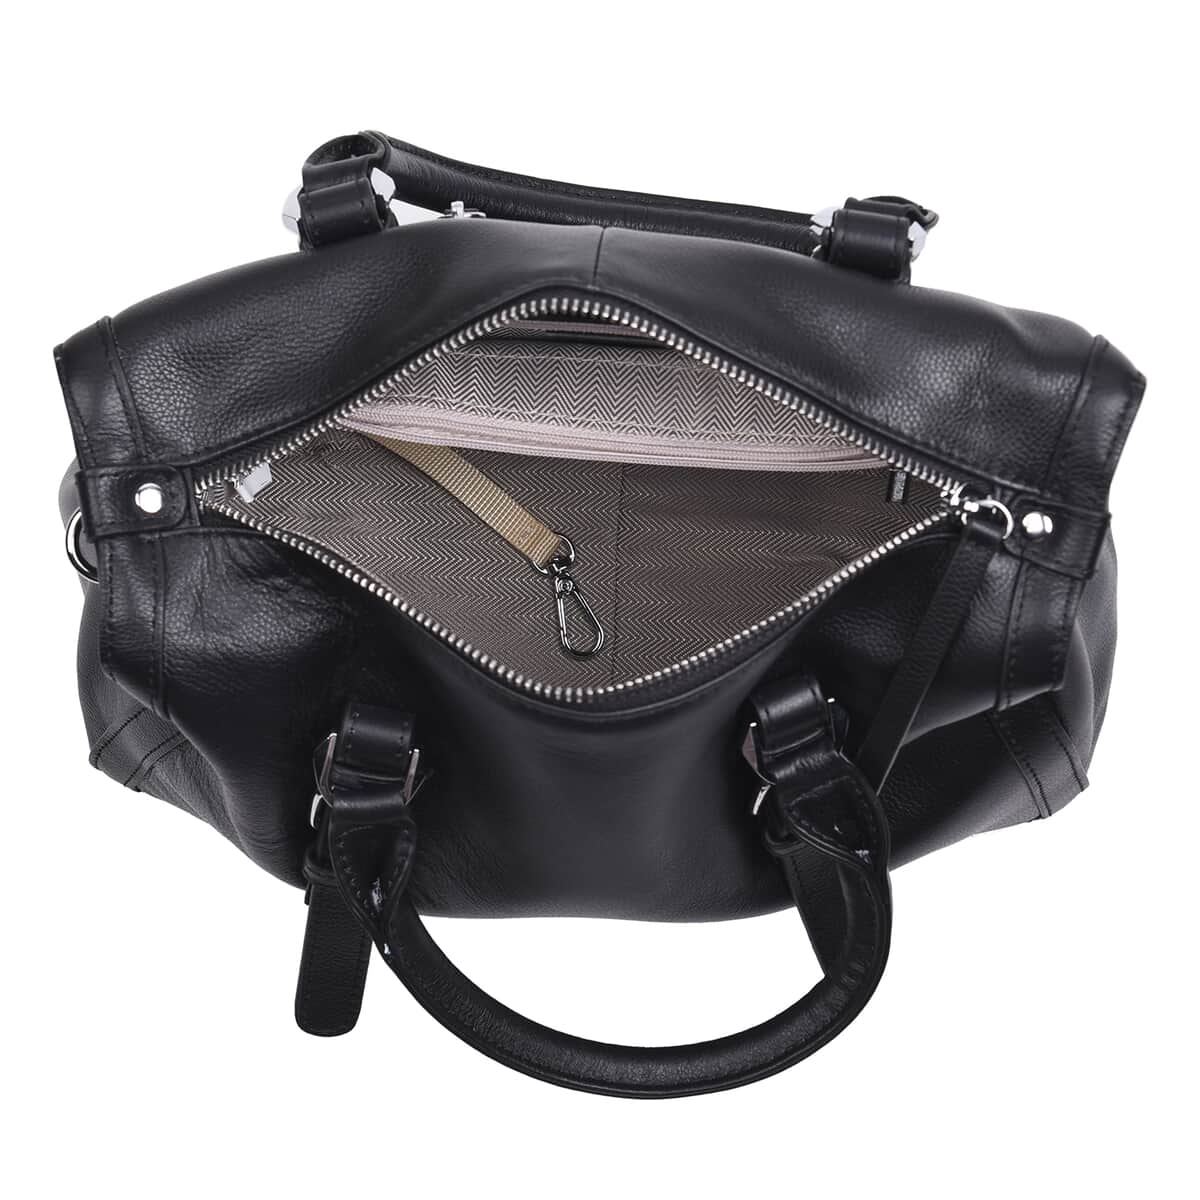 Black Genuine Leather Tote Bag (11.81"X4.72"X7.87") with Top Double Handles and Shoulder Strap image number 5